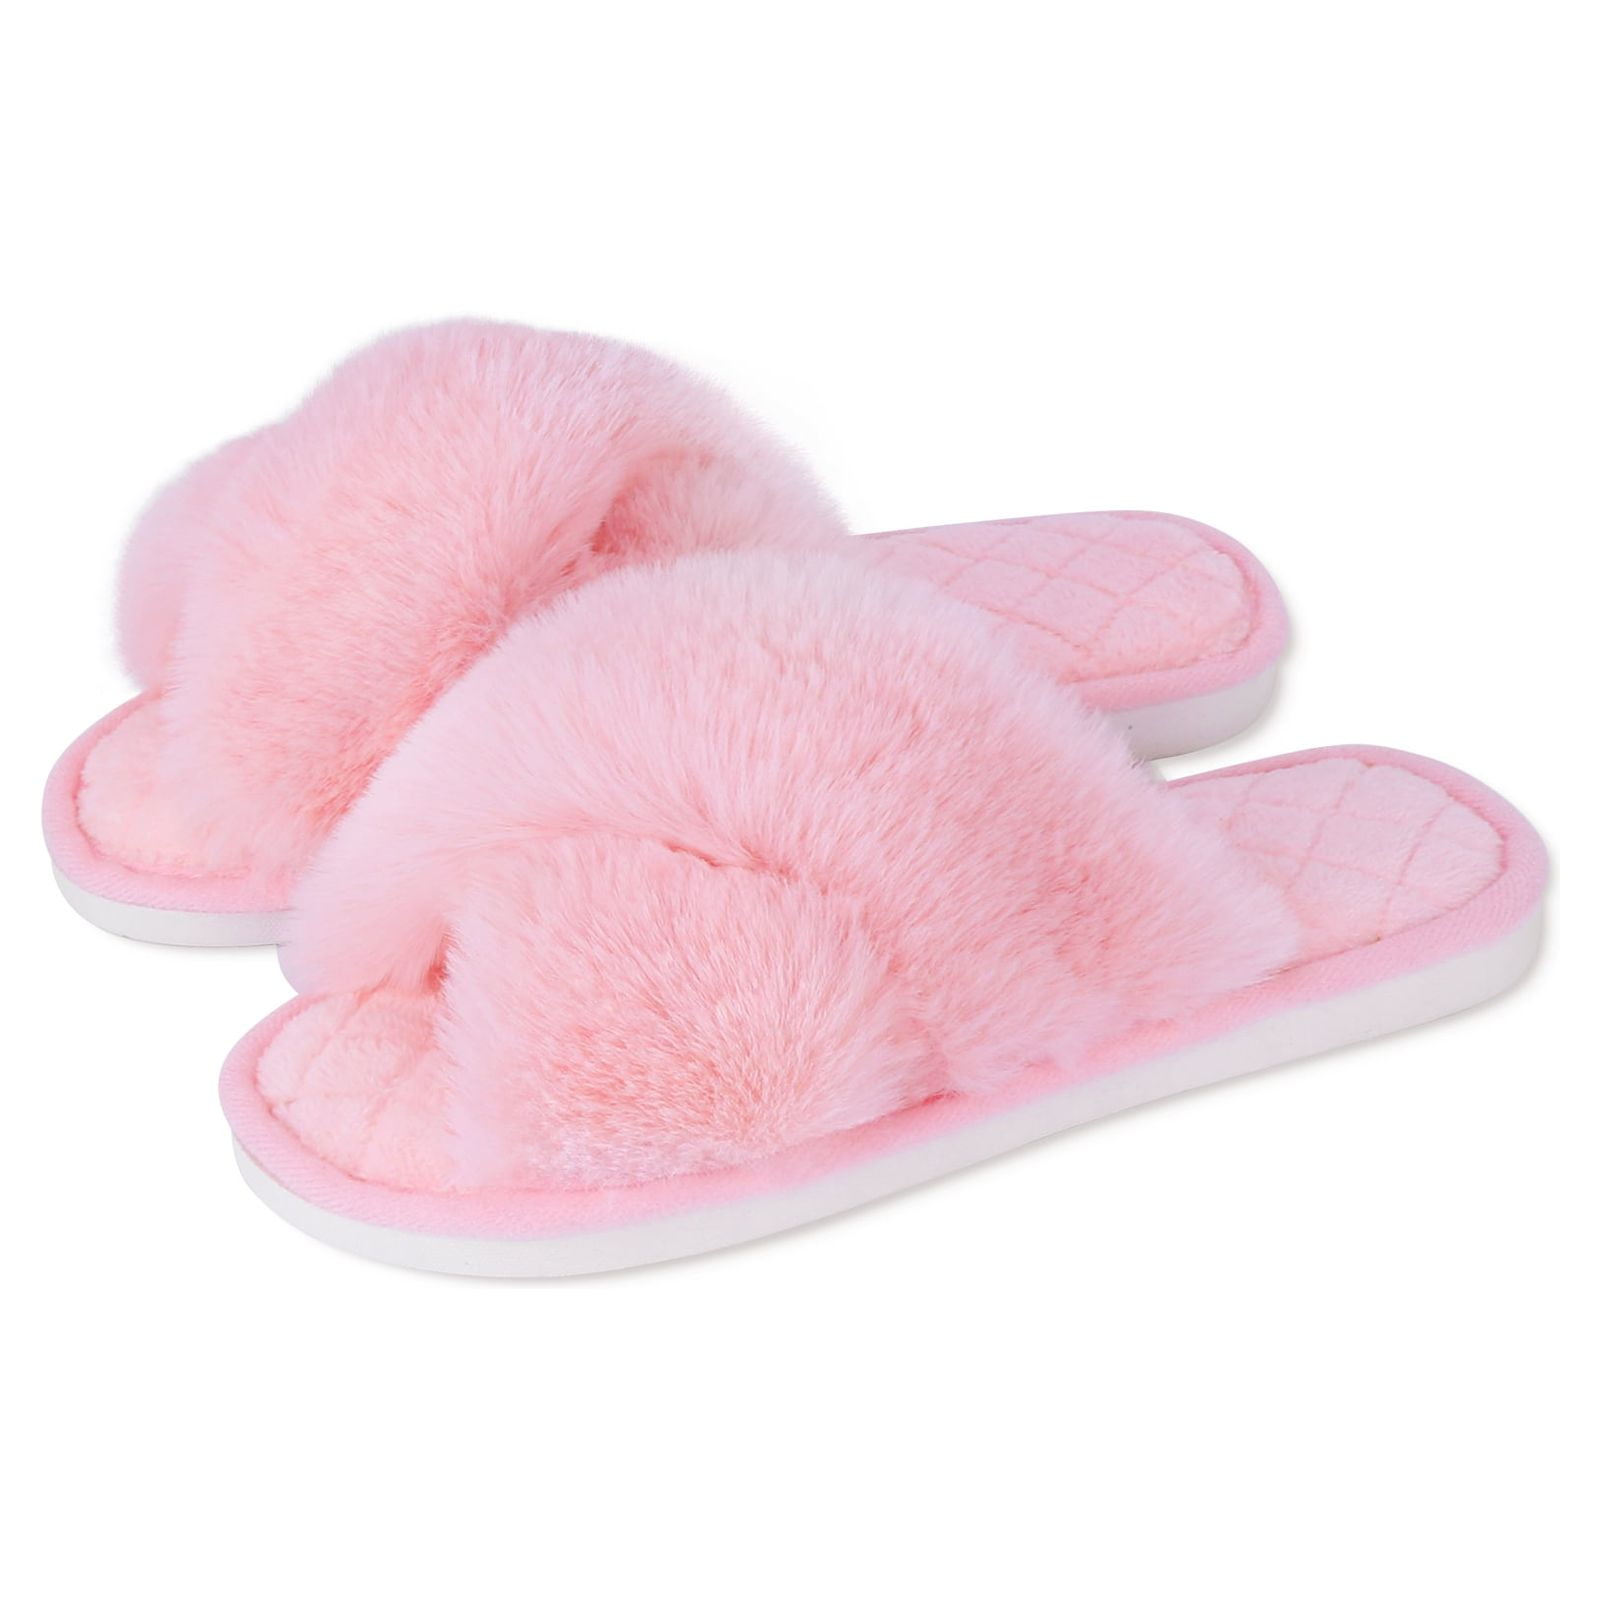 Finvizo Fuzzy Slippers Women's Cross Band Fluffy Slippers Open Toe Furry  House Slippers Size 4 5,Pink